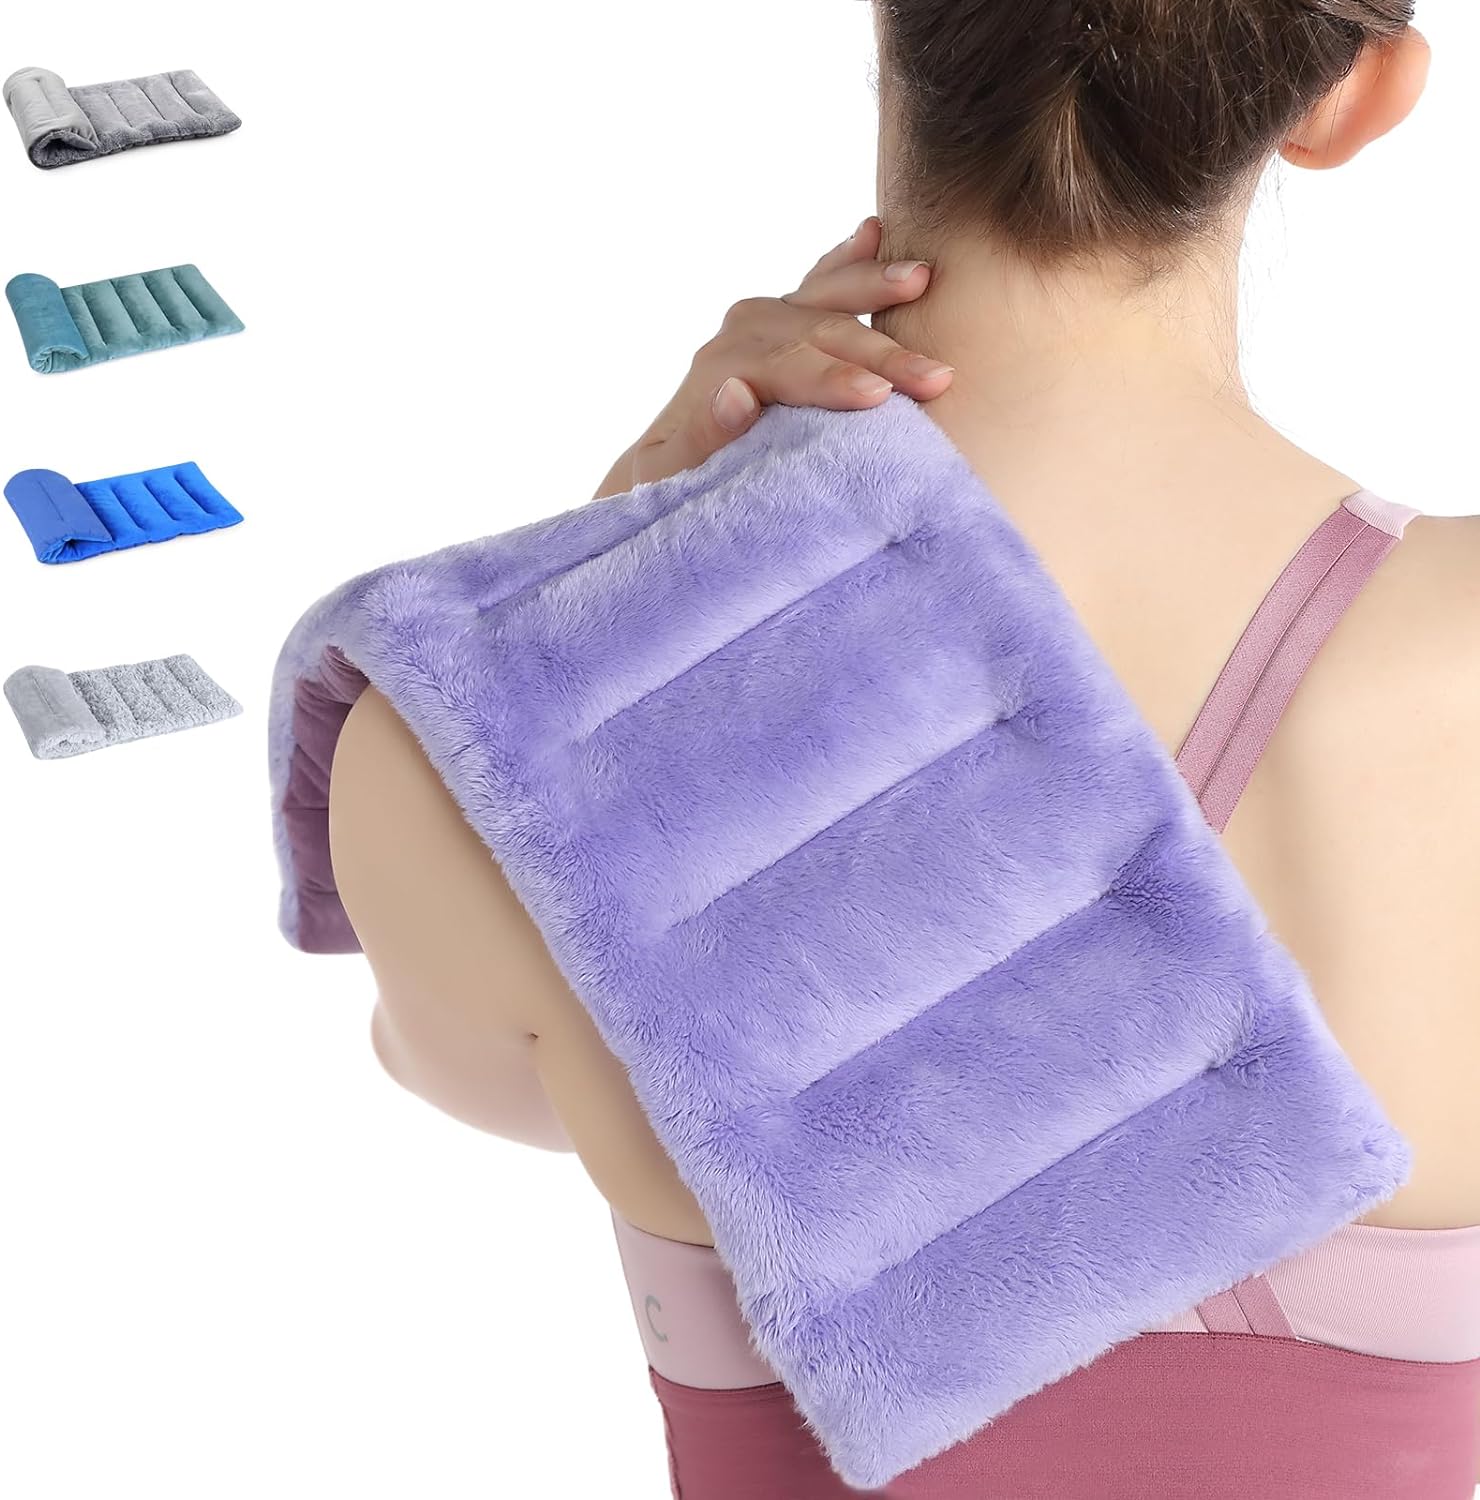 suzzipad microwave heating pad for pain relief,